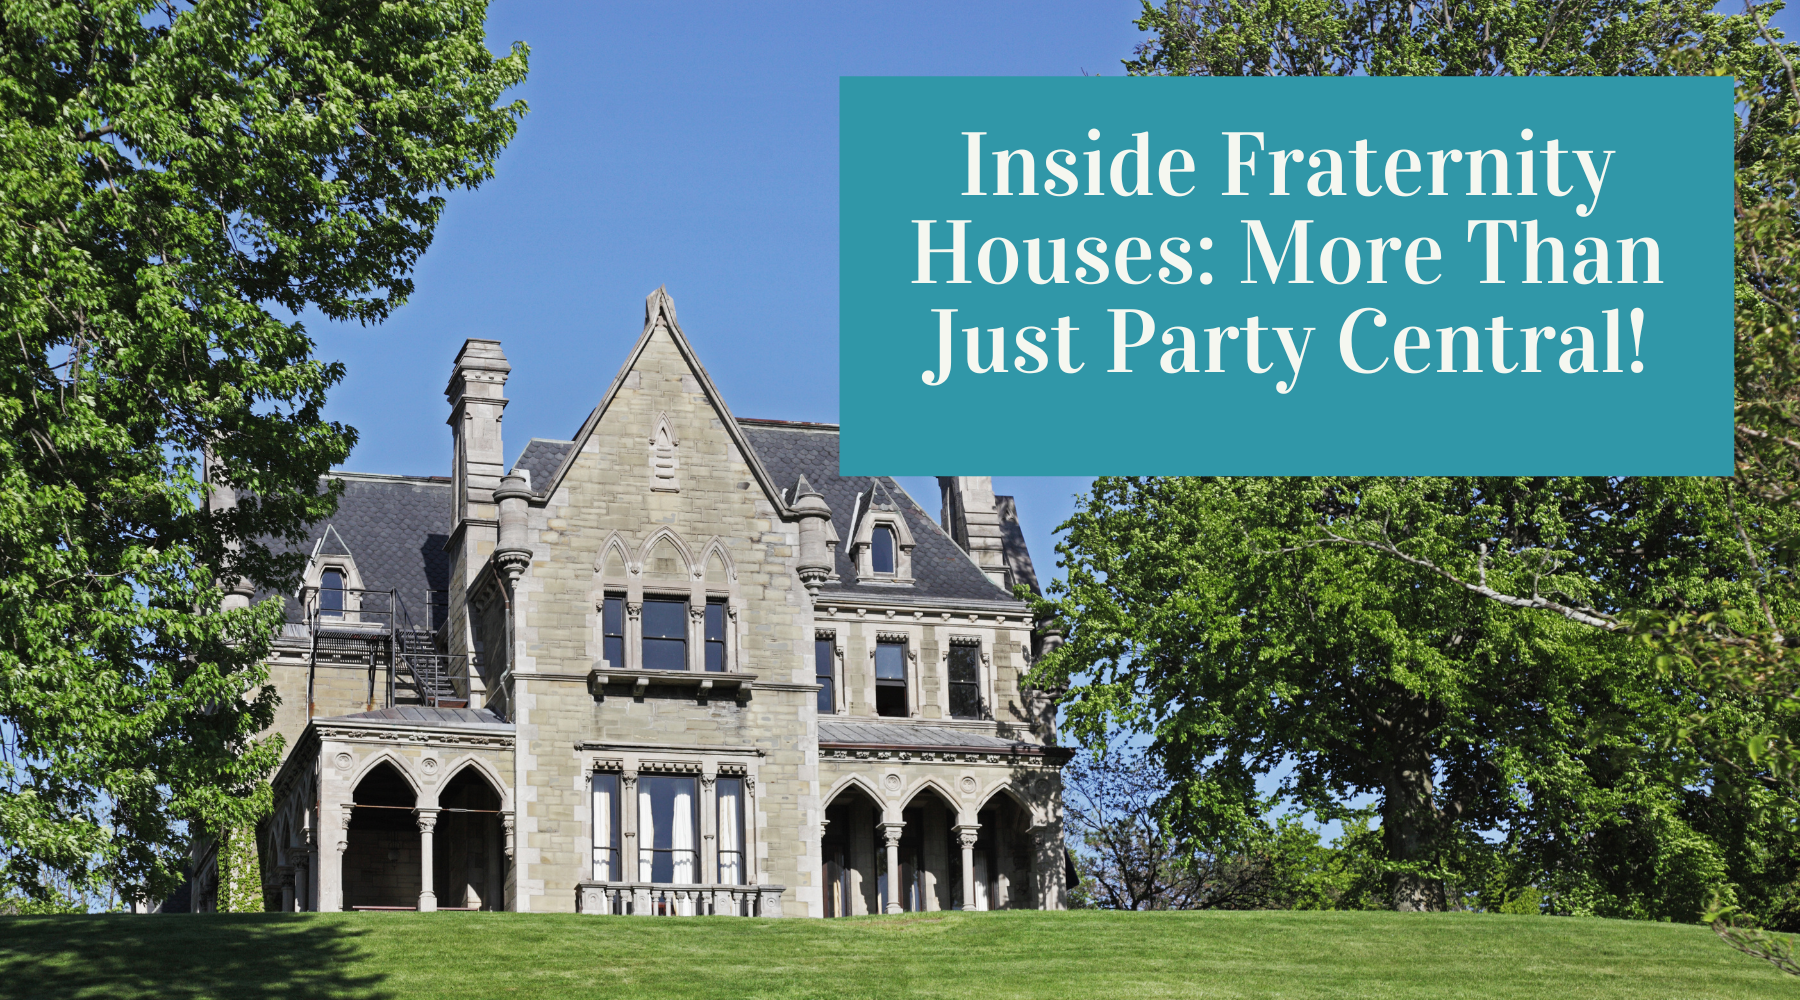 Inside Fraternity Houses: More Than Just Party Central!